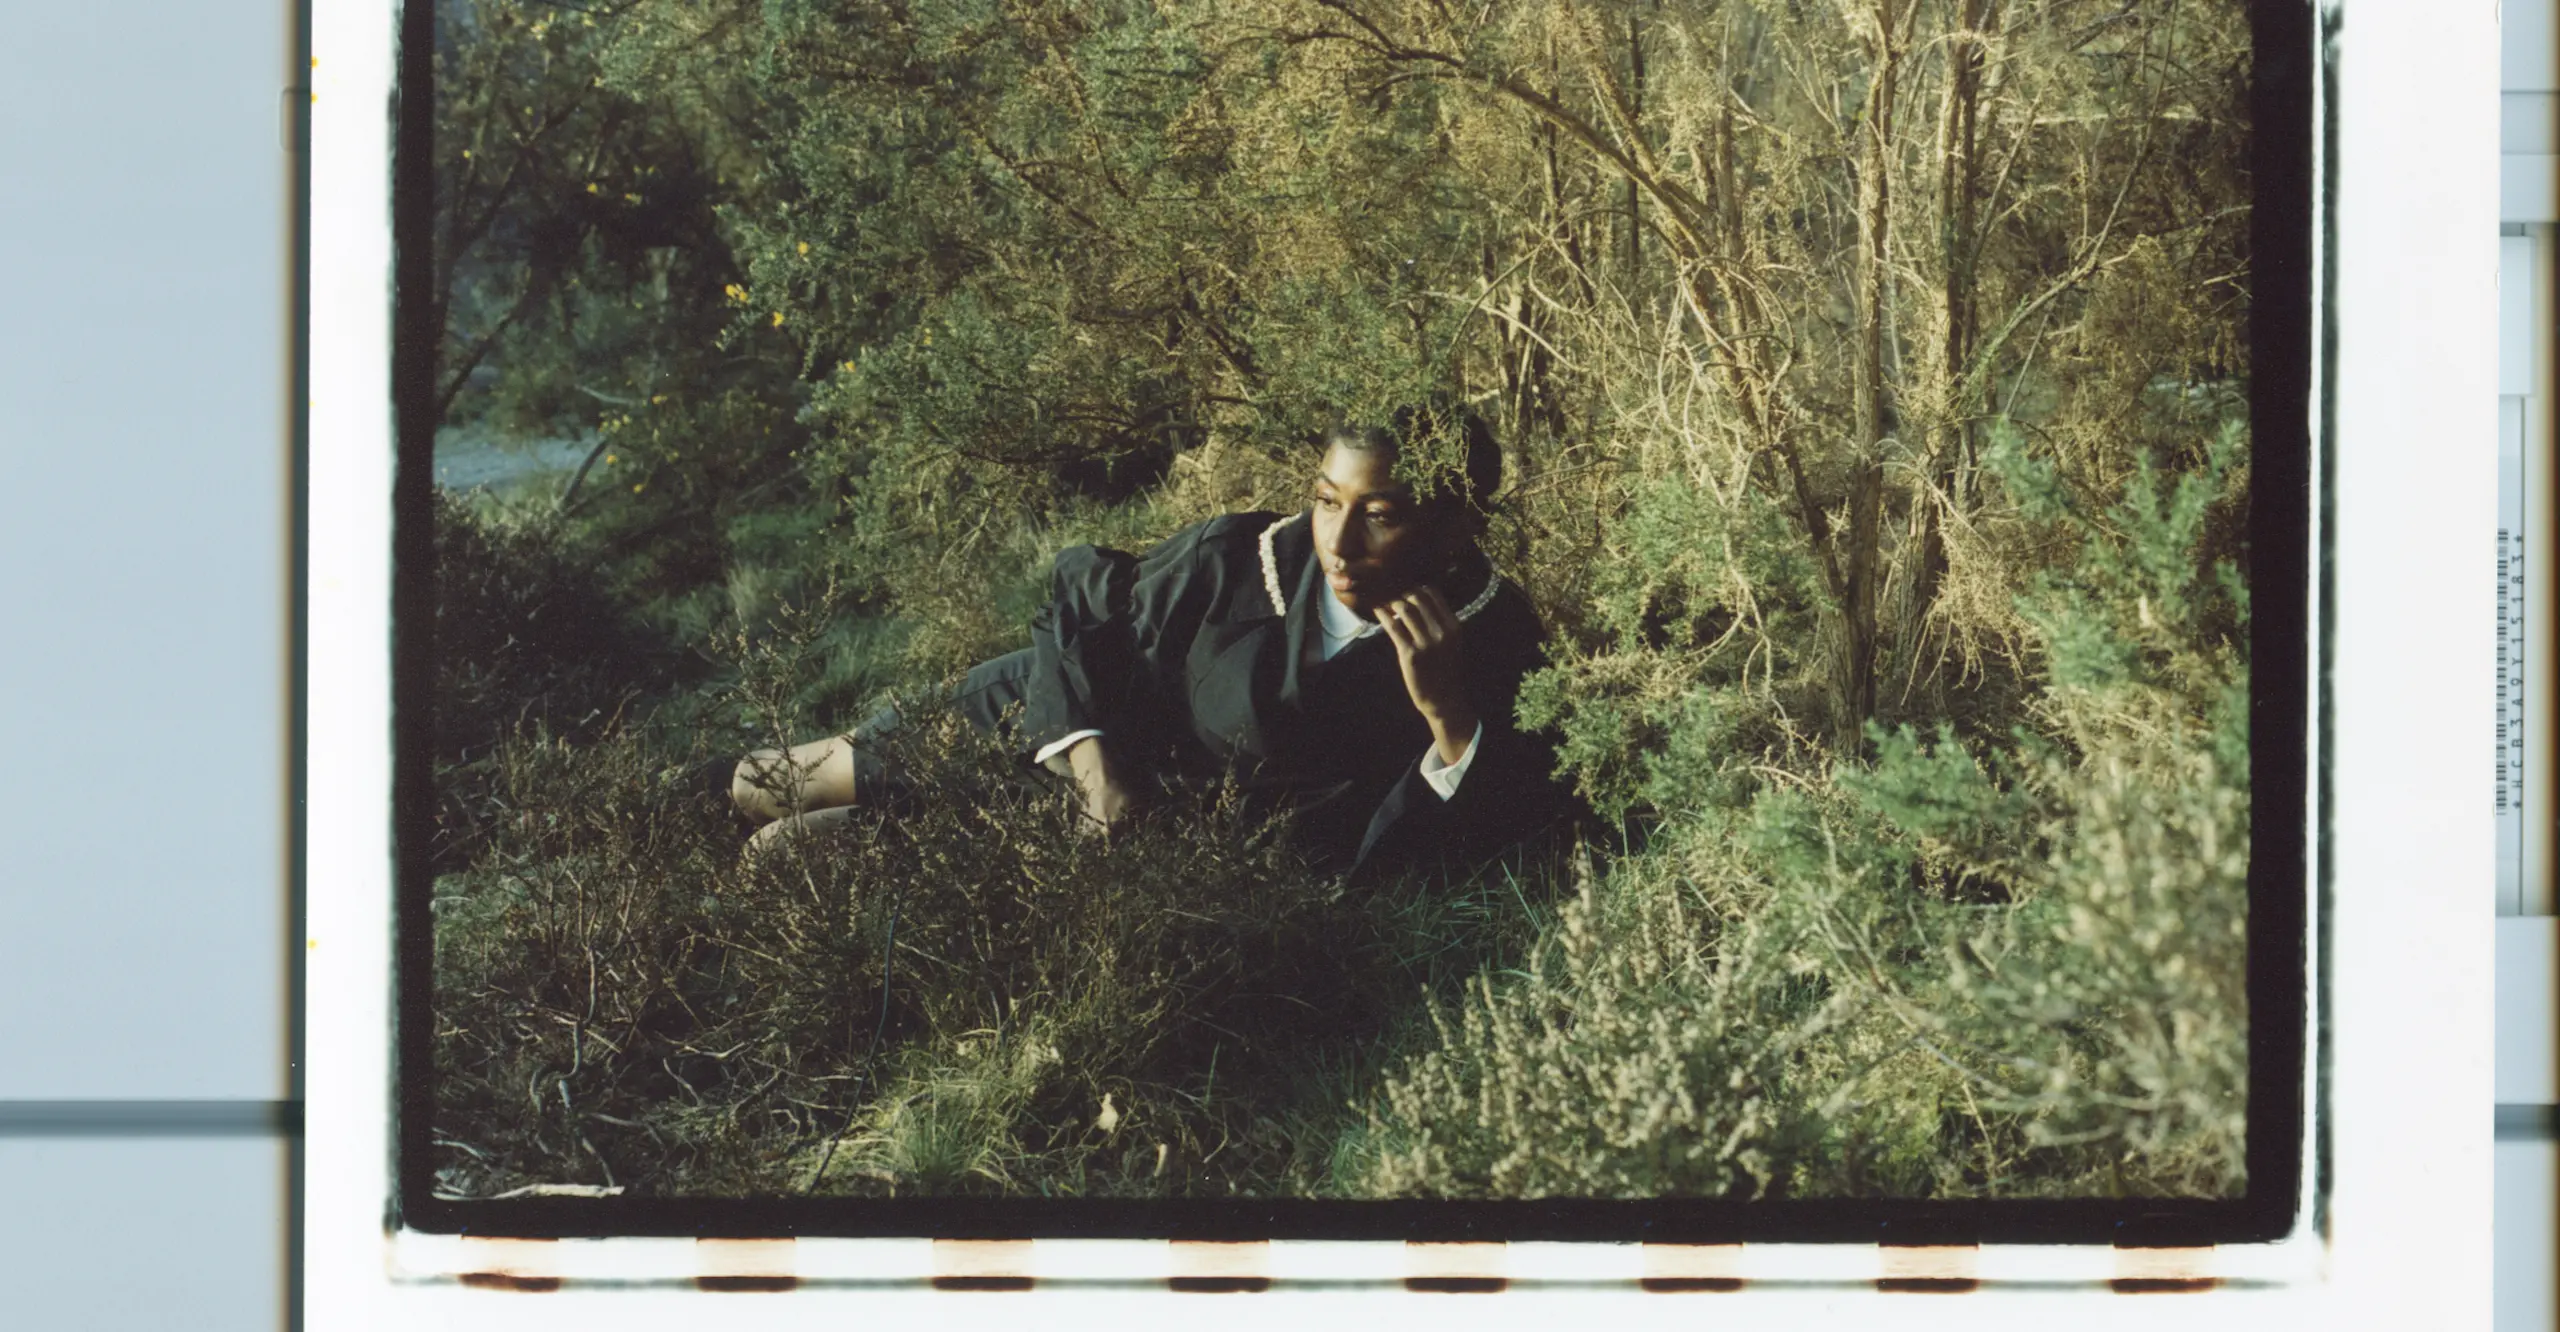 A photograph of a printed image of woman in a bush.